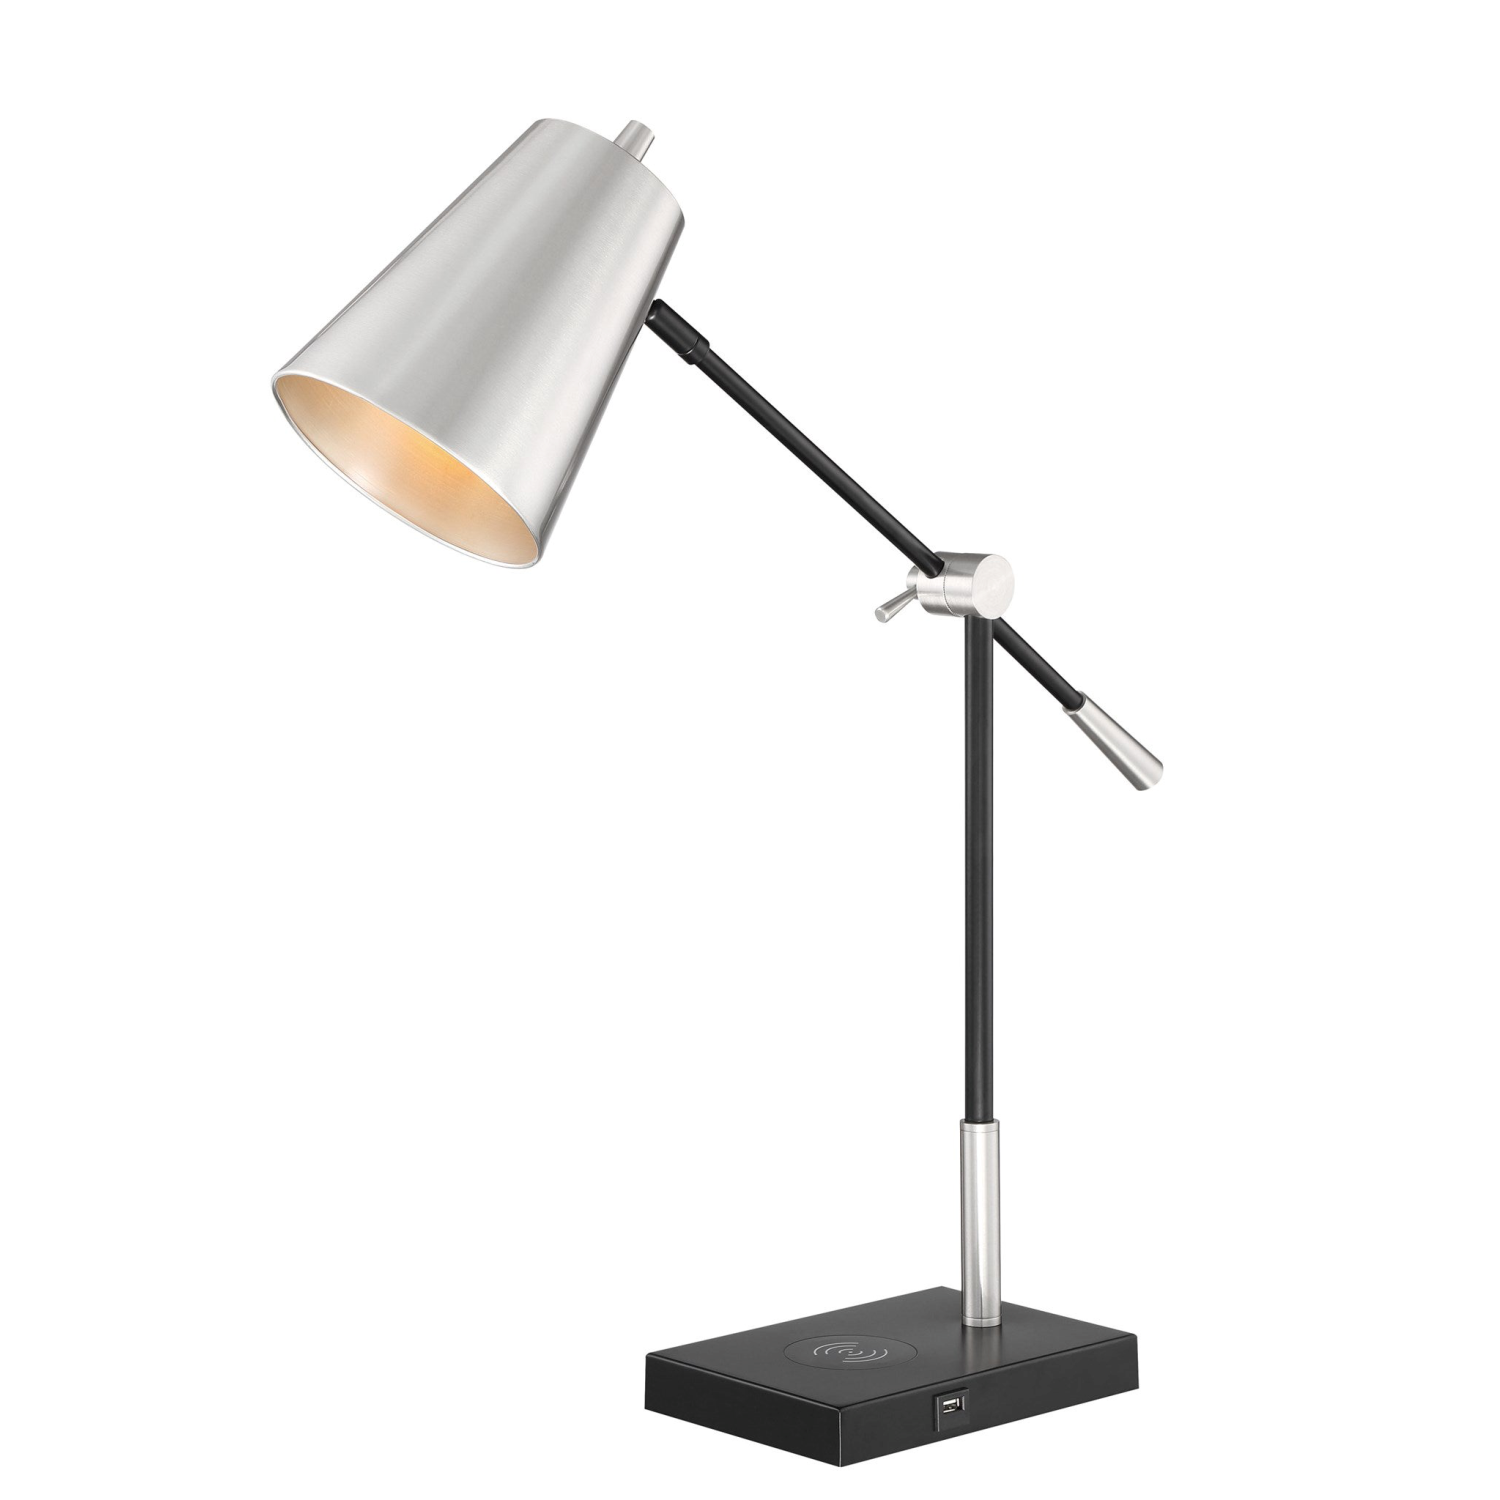 Salma Desk Lamp Color Option Black with Silver Finish Accents